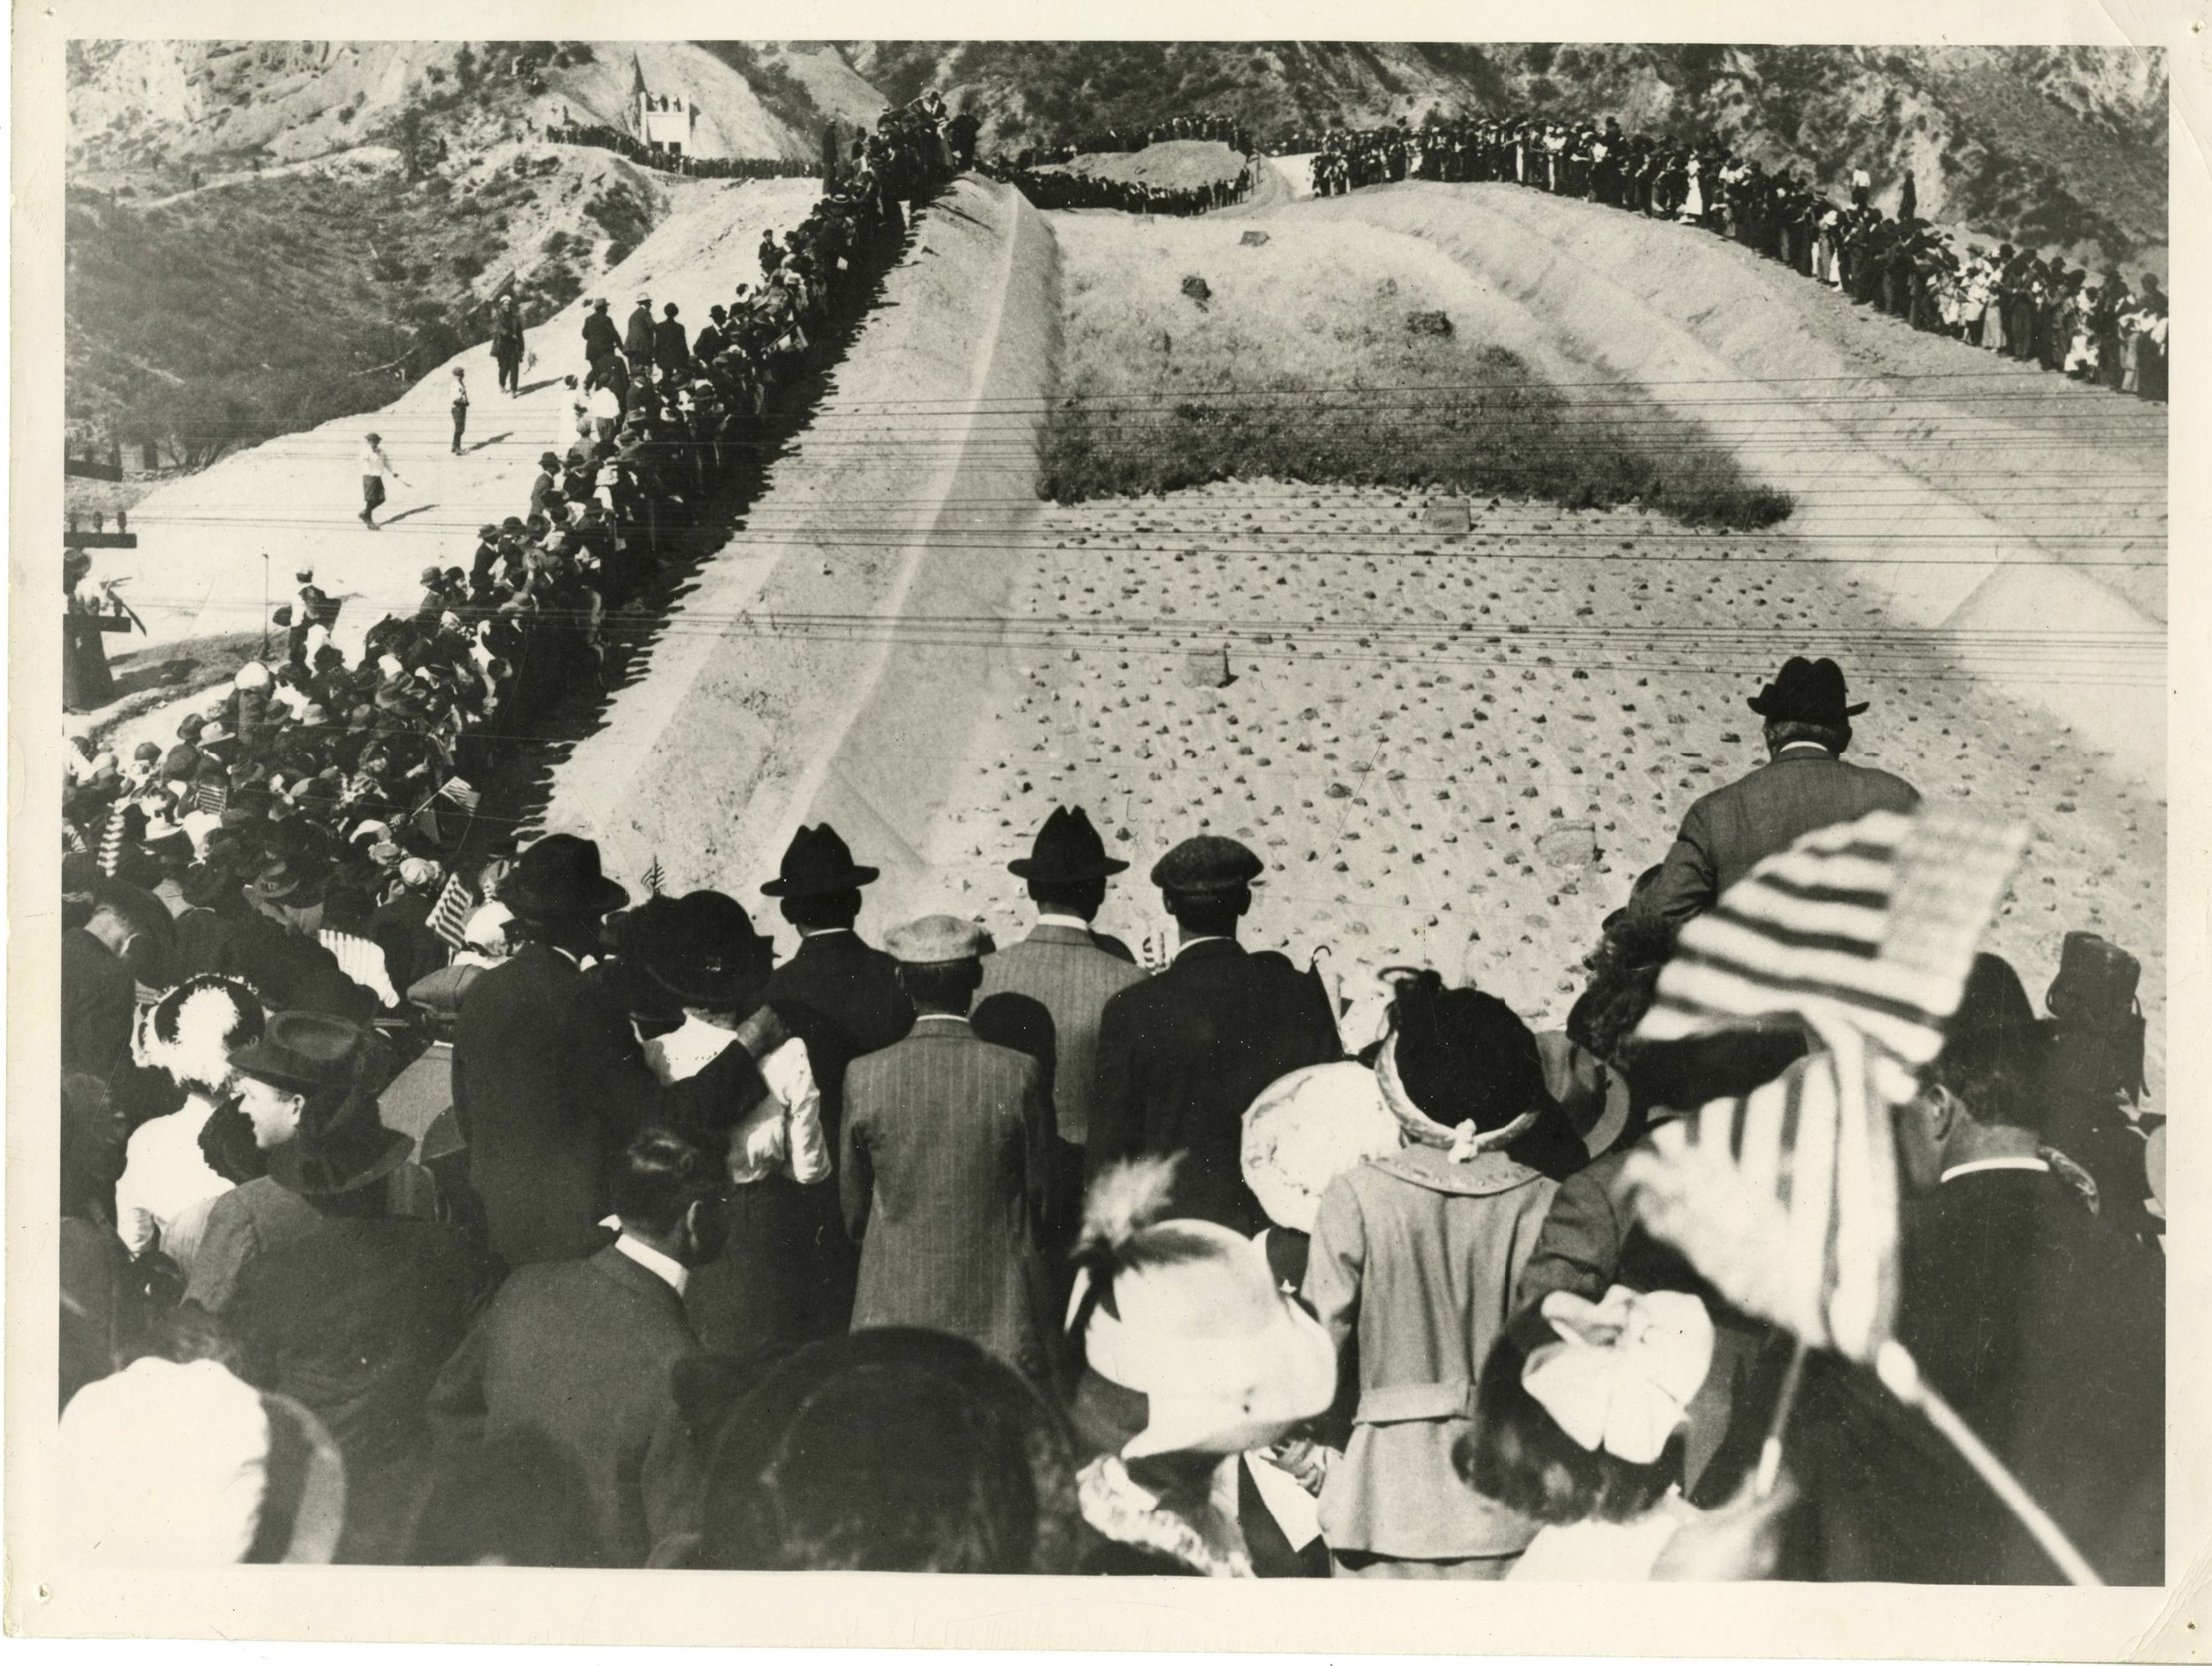  Crowd gathered around the Newhall Spillway, as the Aqueduct first fills up with water 1913 Nov 